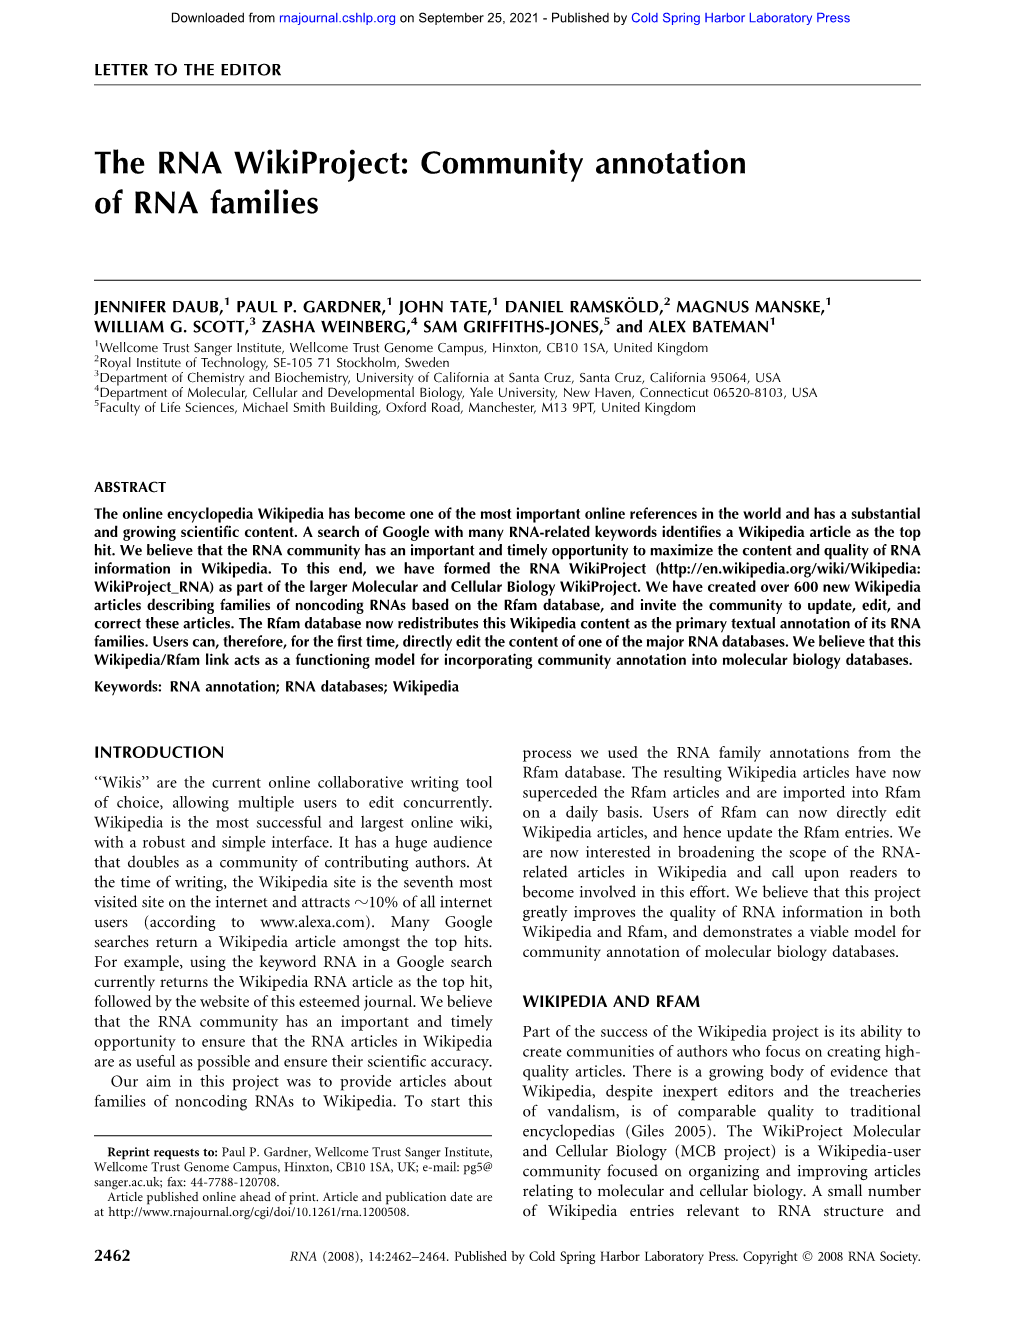 The RNA Wikiproject: Community Annotation of RNA Families